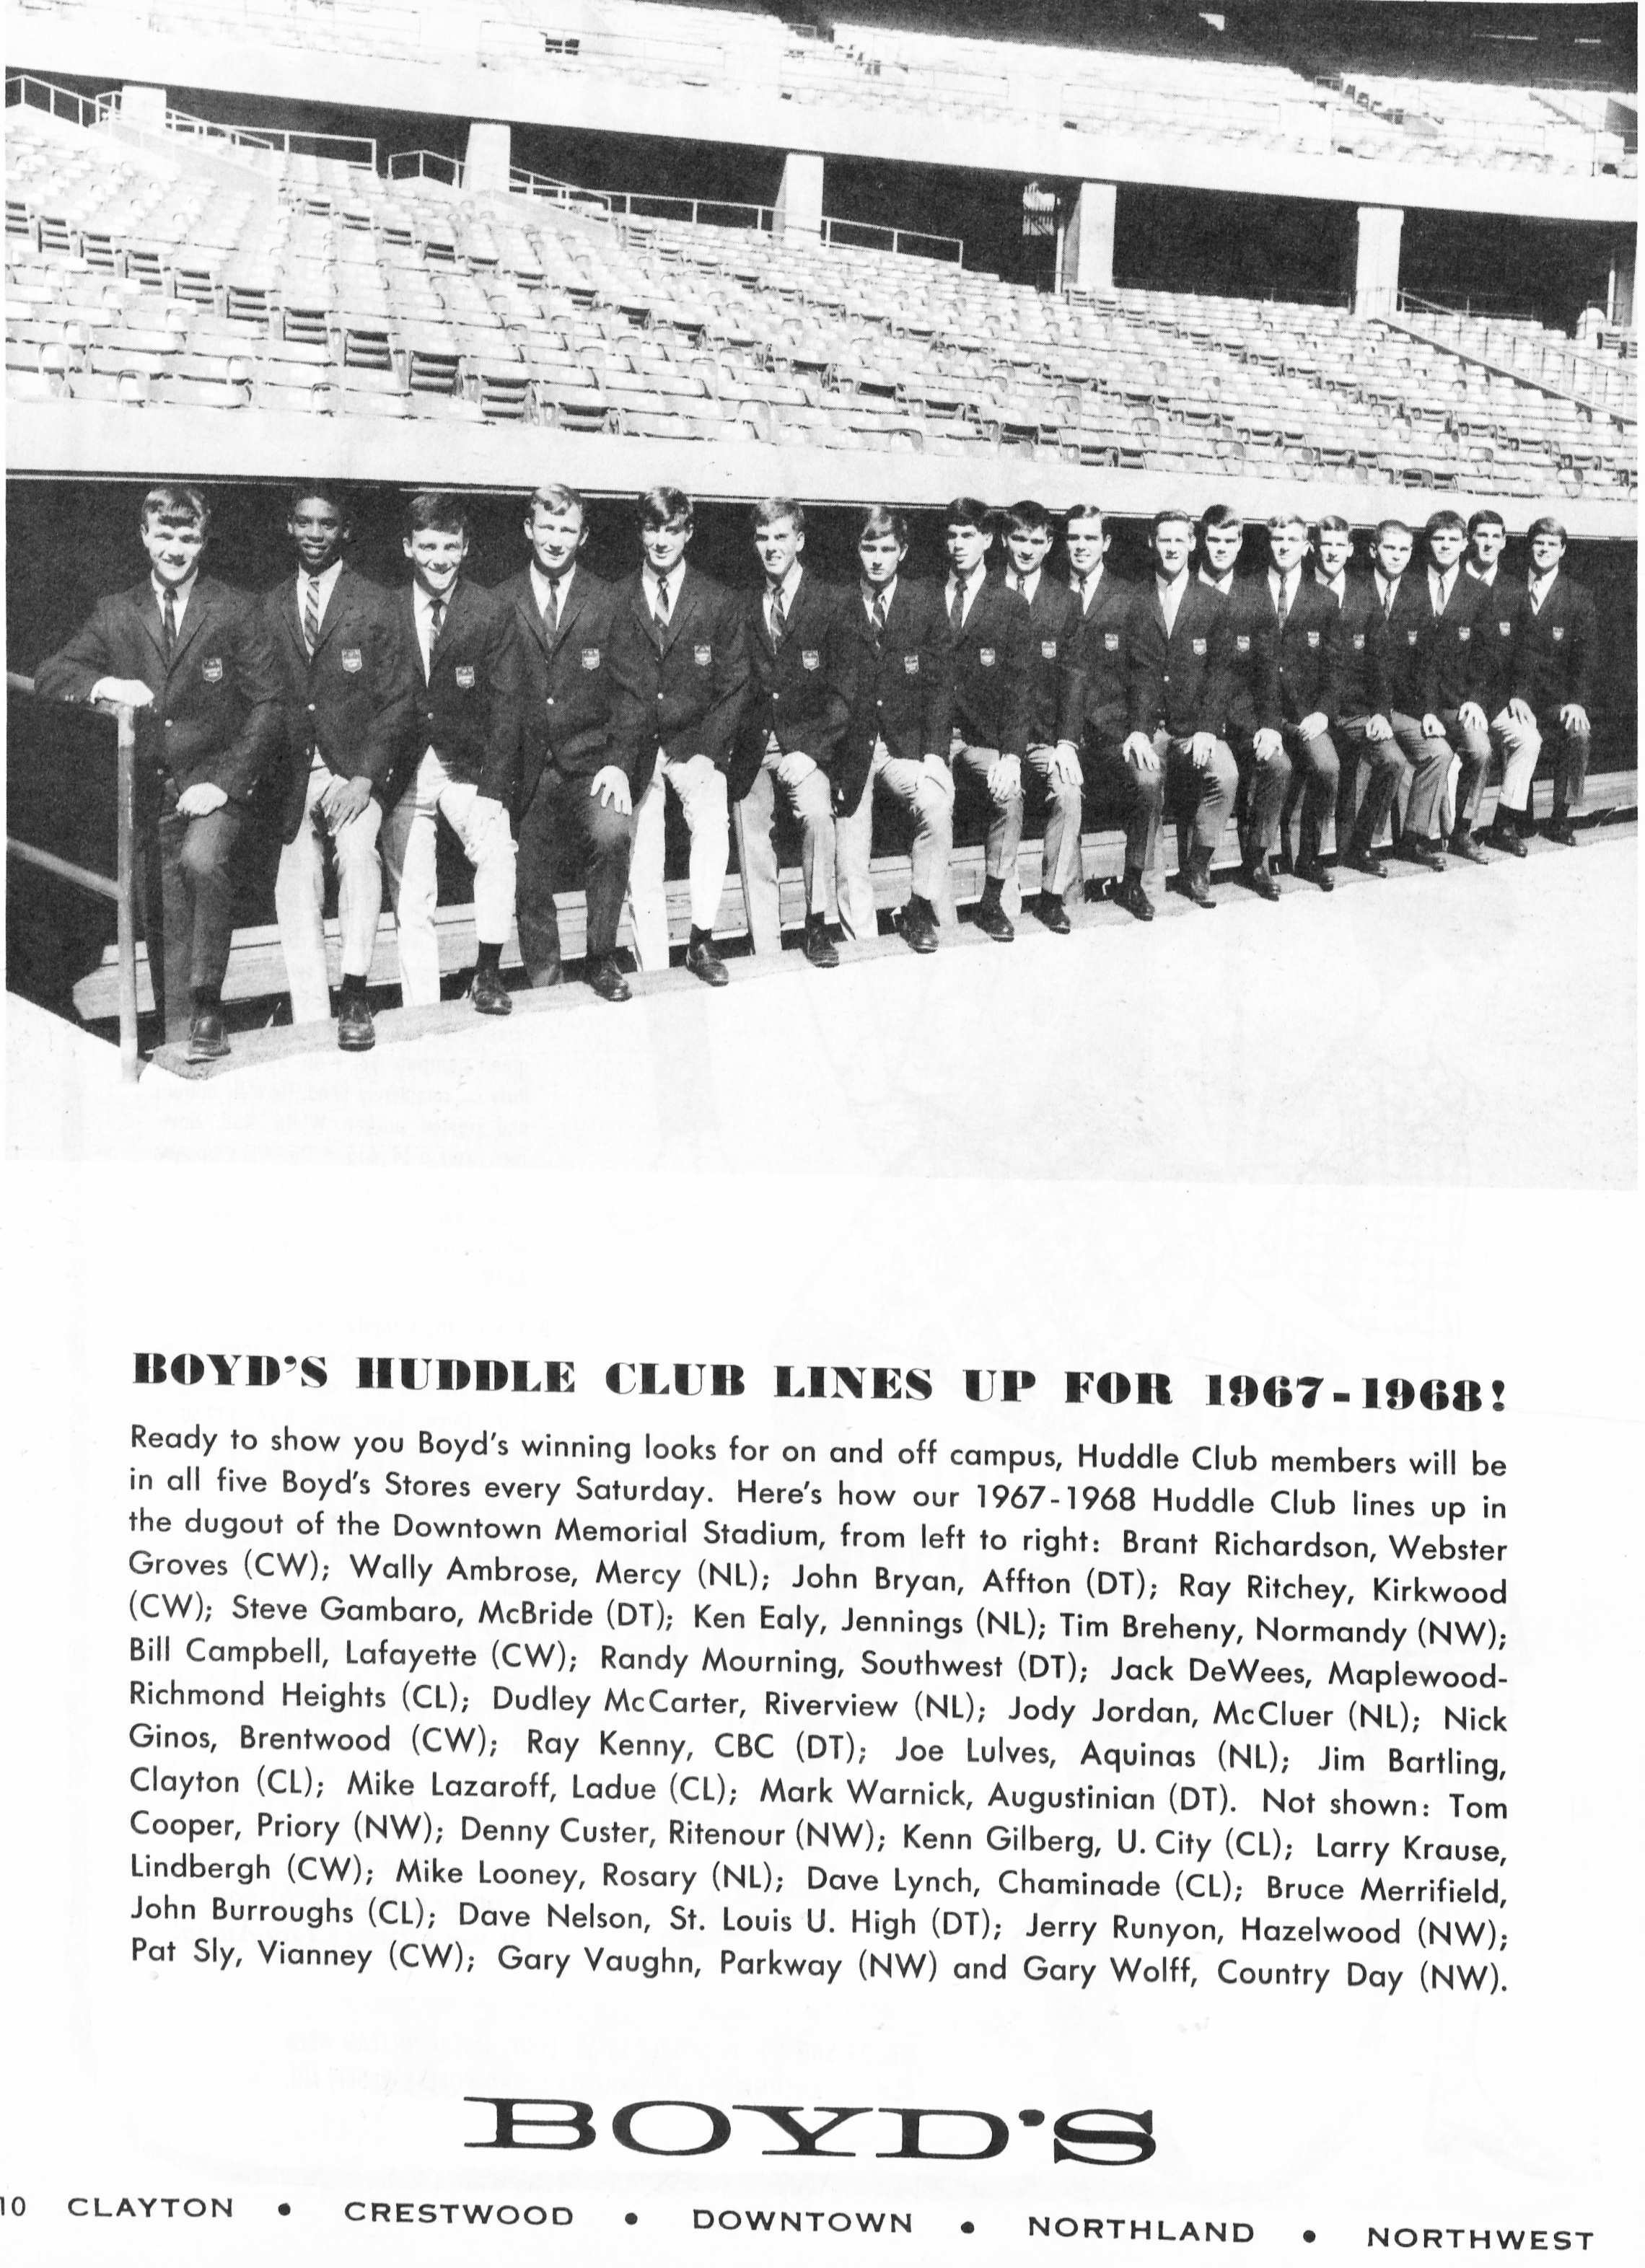 That's Dudley McCarter (eighth from the right), Member of the BOYD'S Huddle Club, in the dugout of the newly-constructed Busch Memorial Stadium. PROM MAGAZINE SEPTEMBER 1967